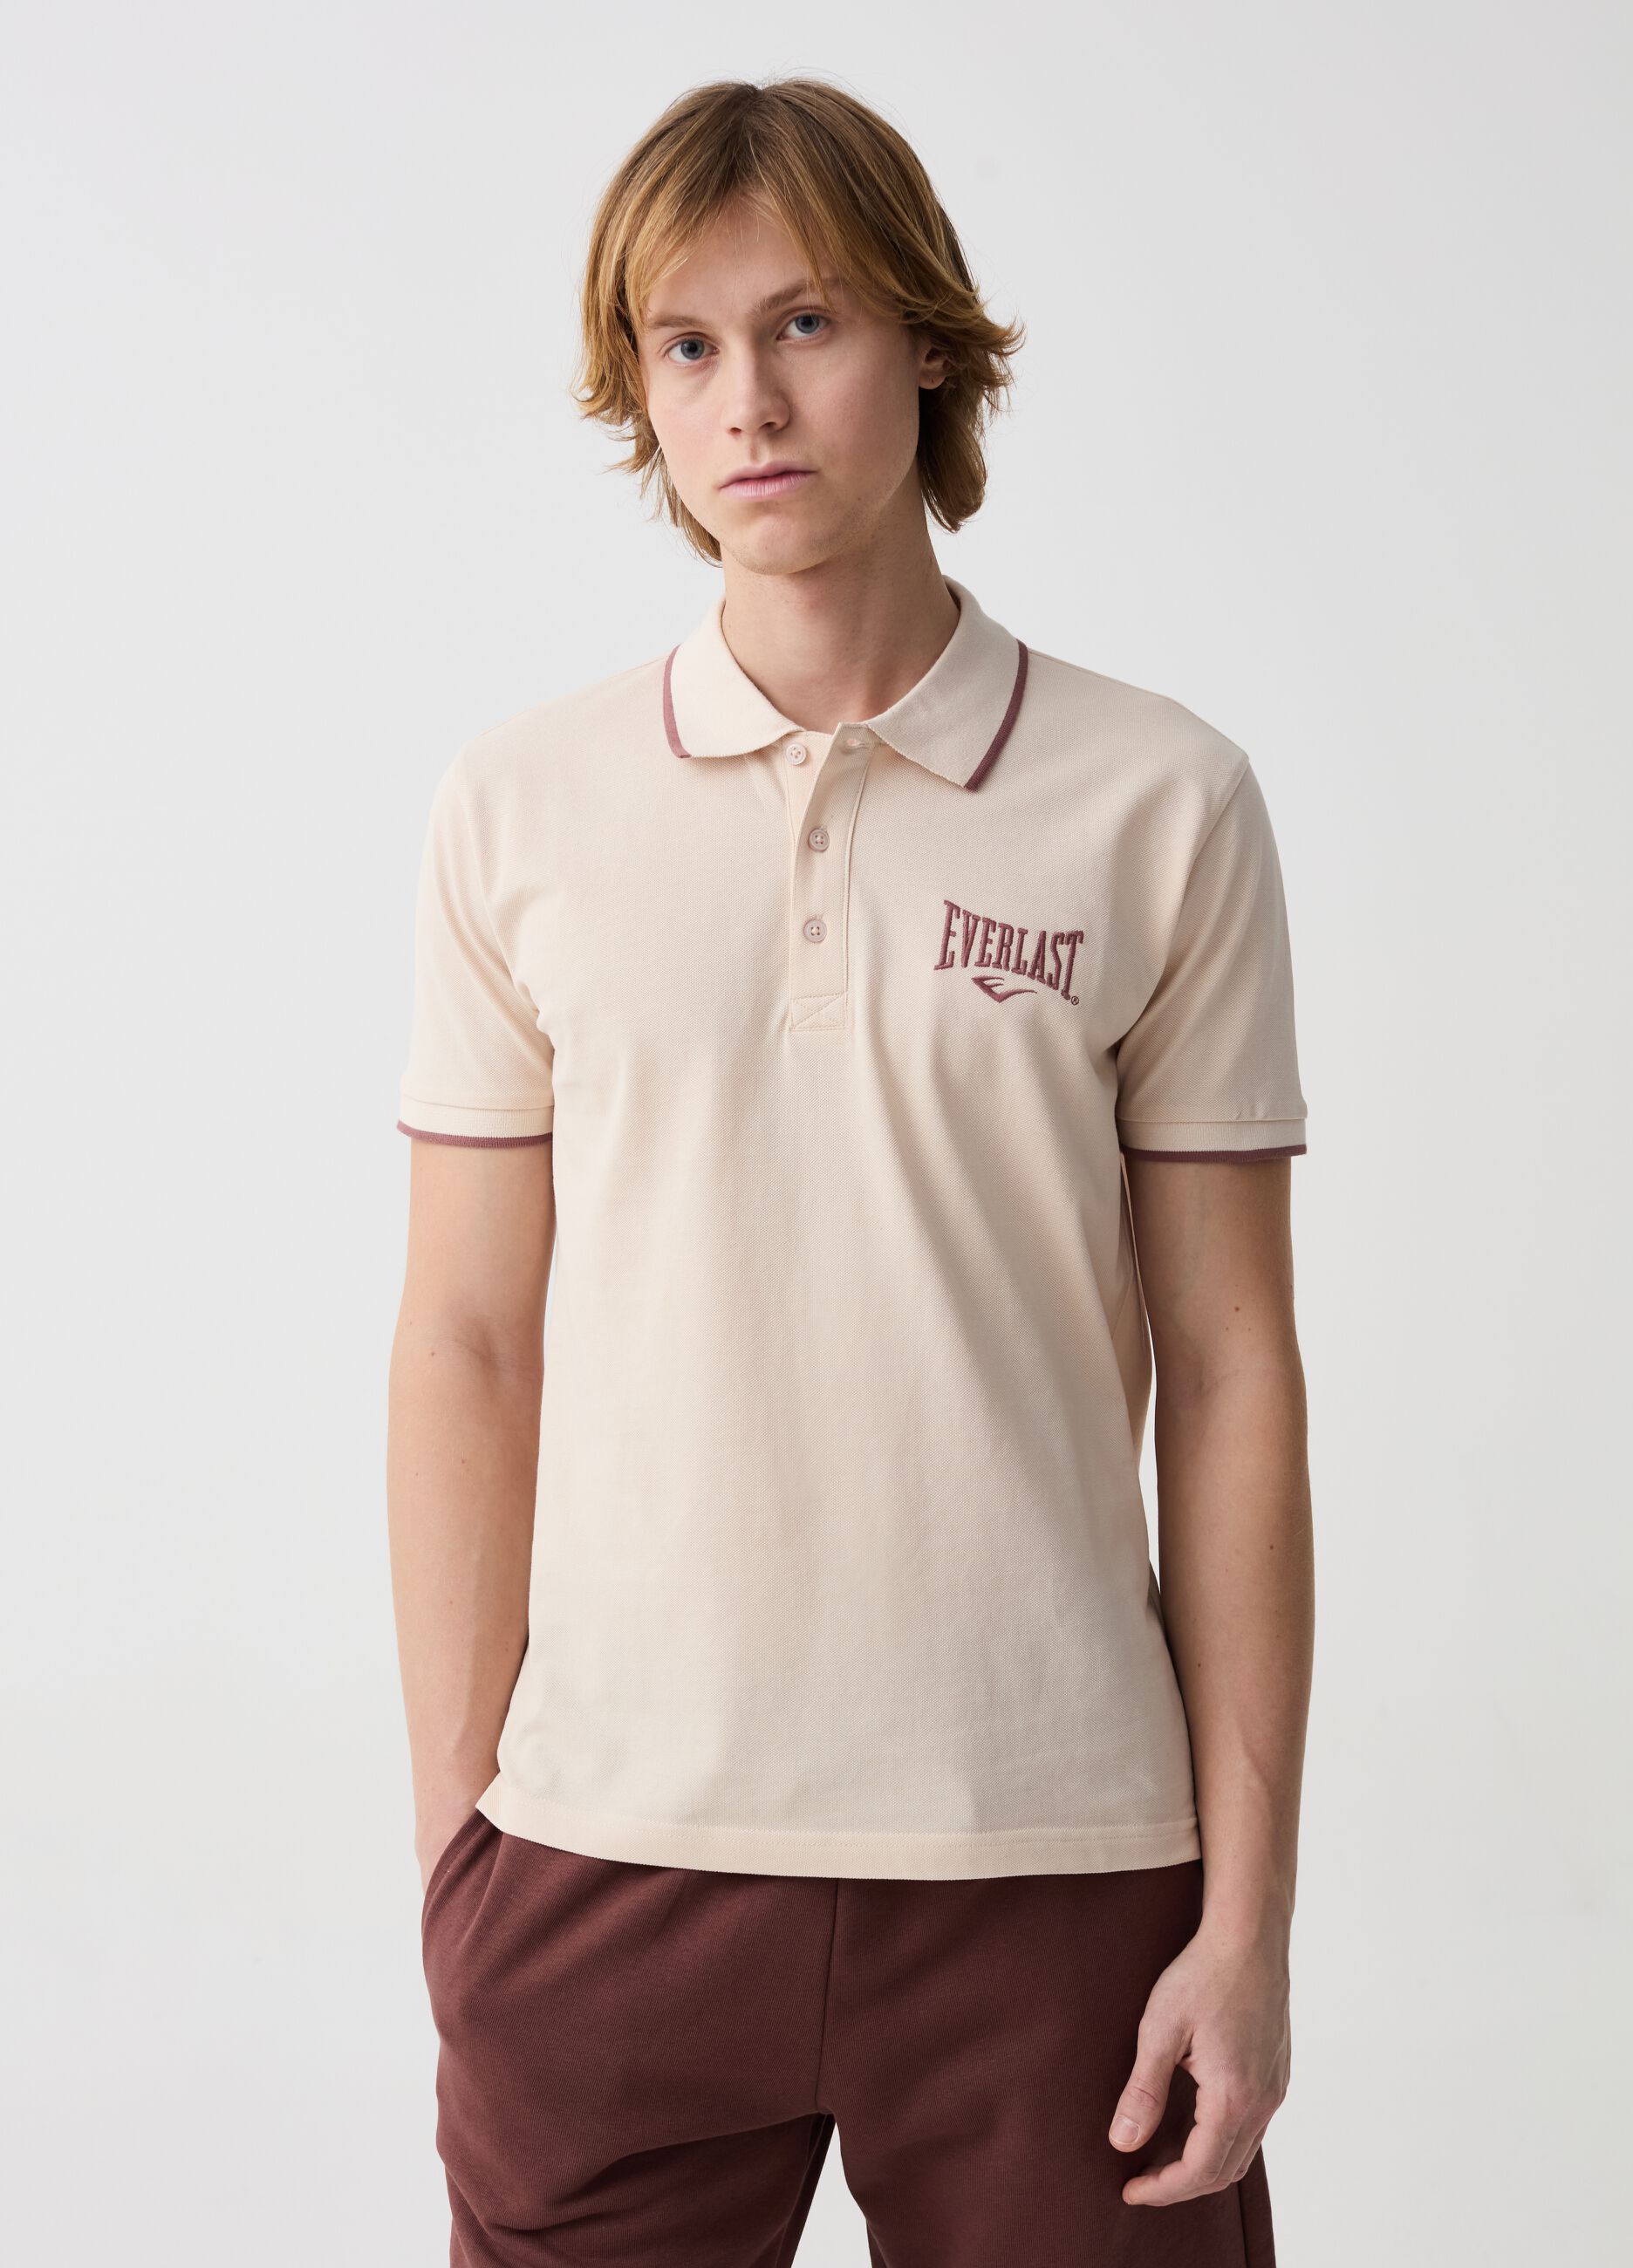 Polo shirt with striped edging and logo embroidery